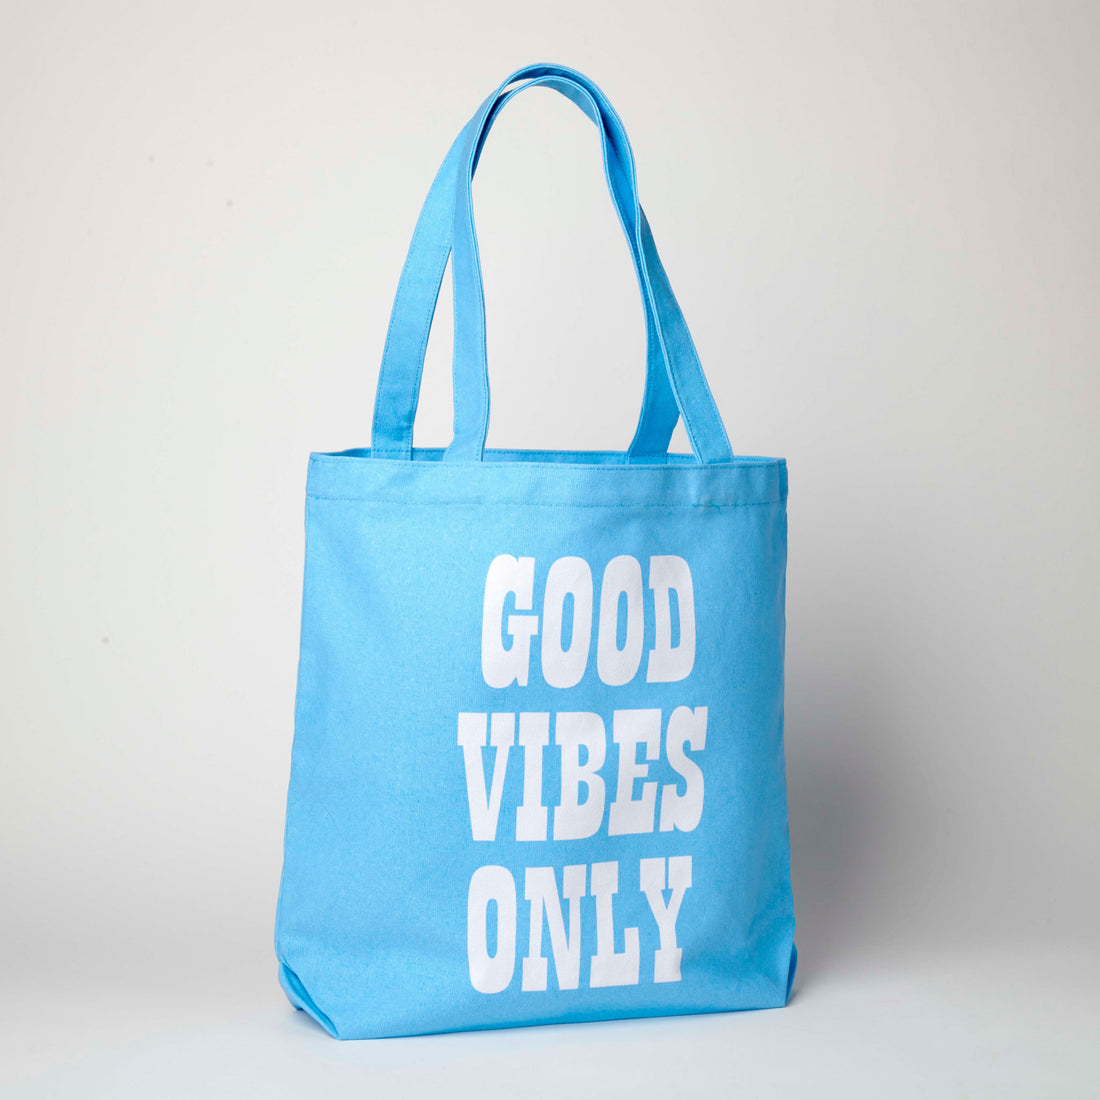 Peanuts Tote - Good Vibes Only